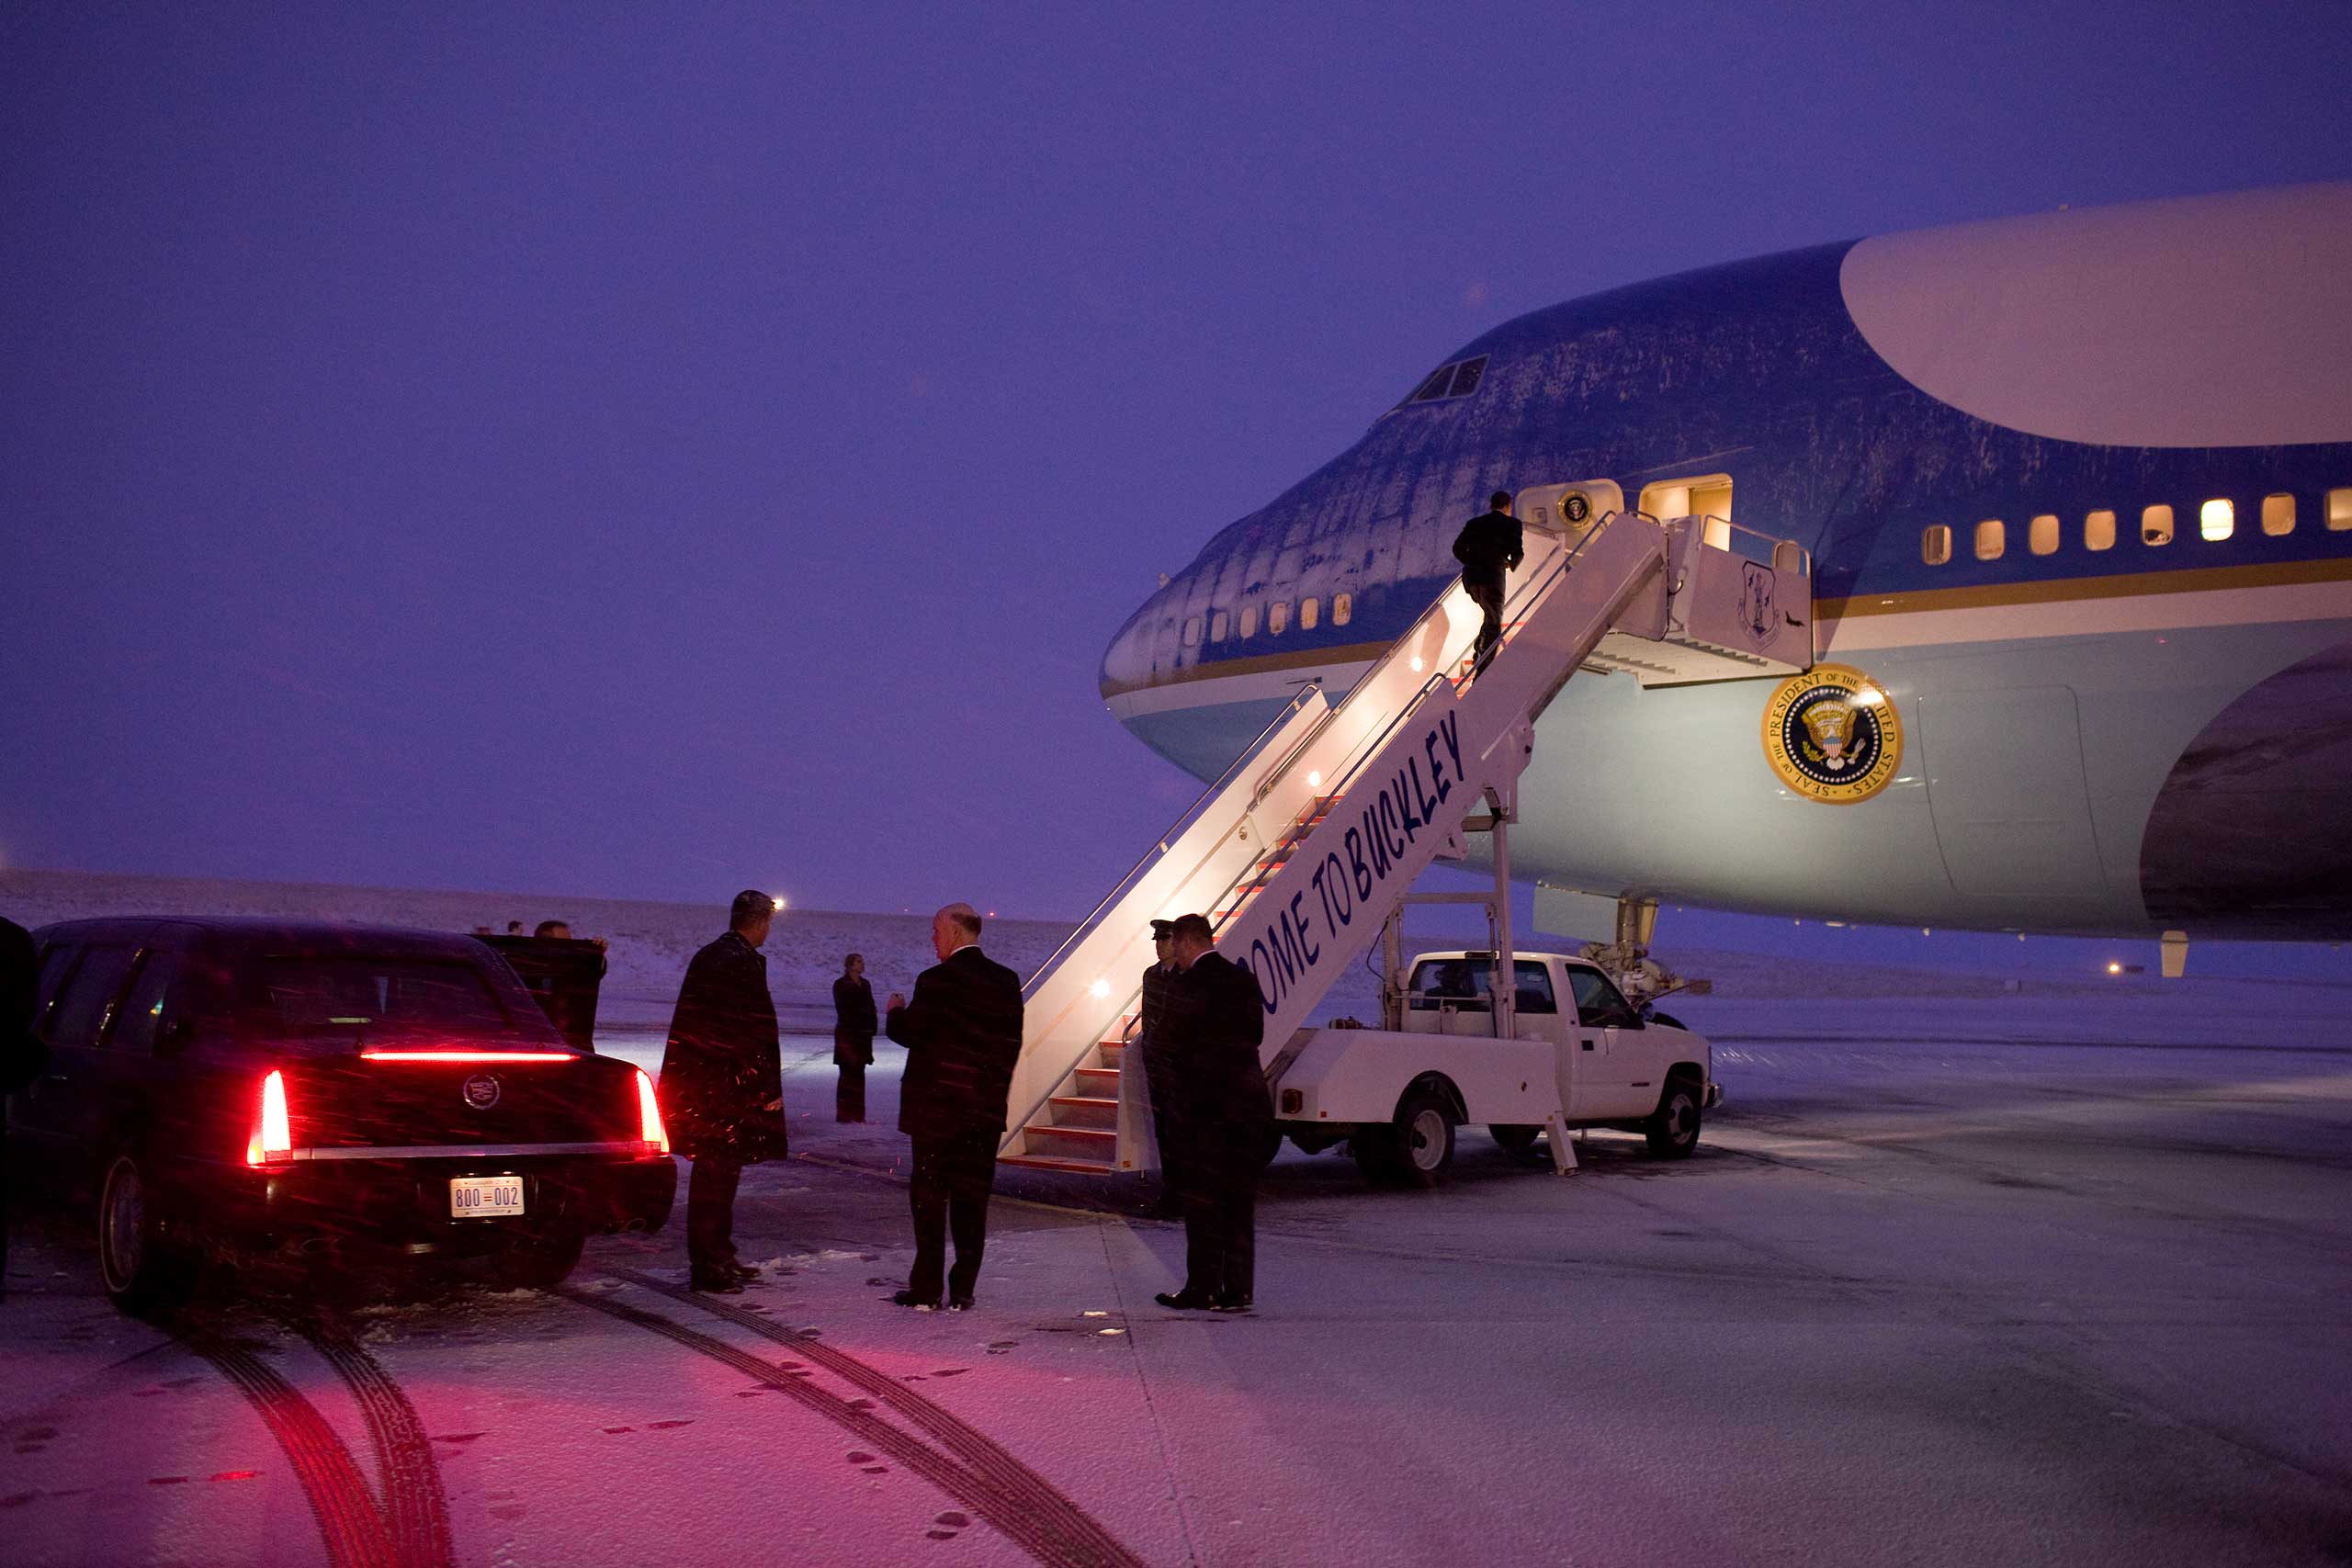 Clancy stands watch as the President boards Air Force One at Buckley Air Force Base in Denver, Colo., en route to Las Vegas, Nev. on Feb. 18, 2010.